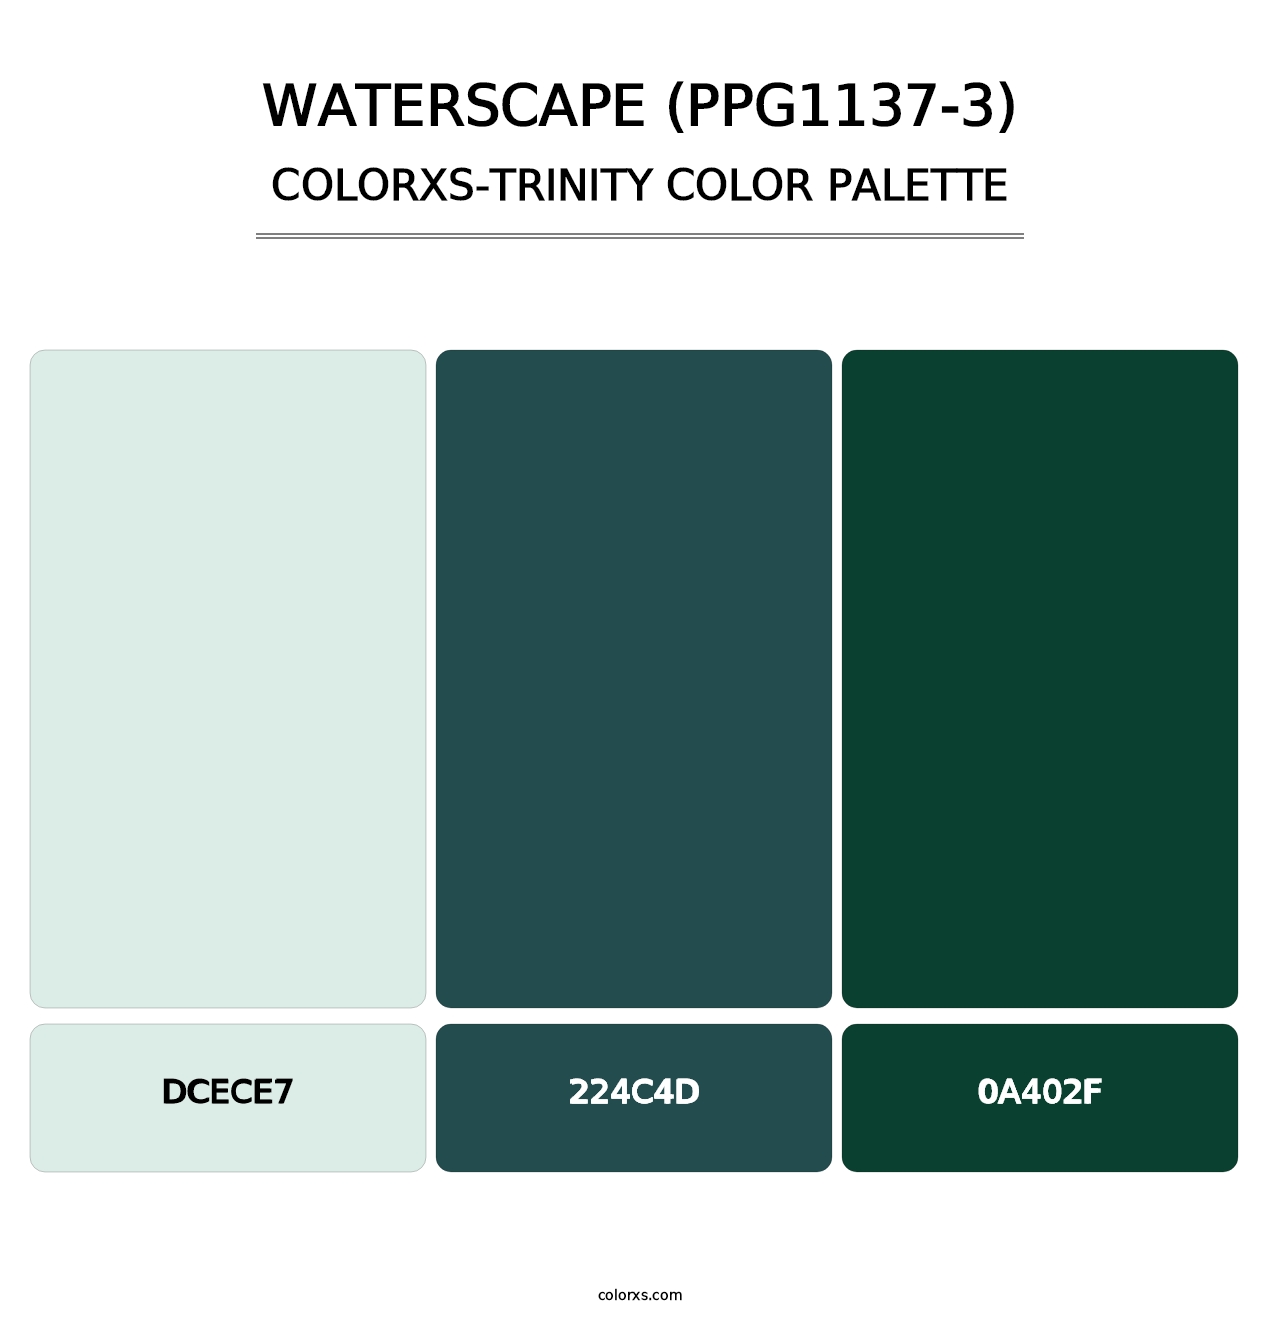 Waterscape (PPG1137-3) - Colorxs Trinity Palette